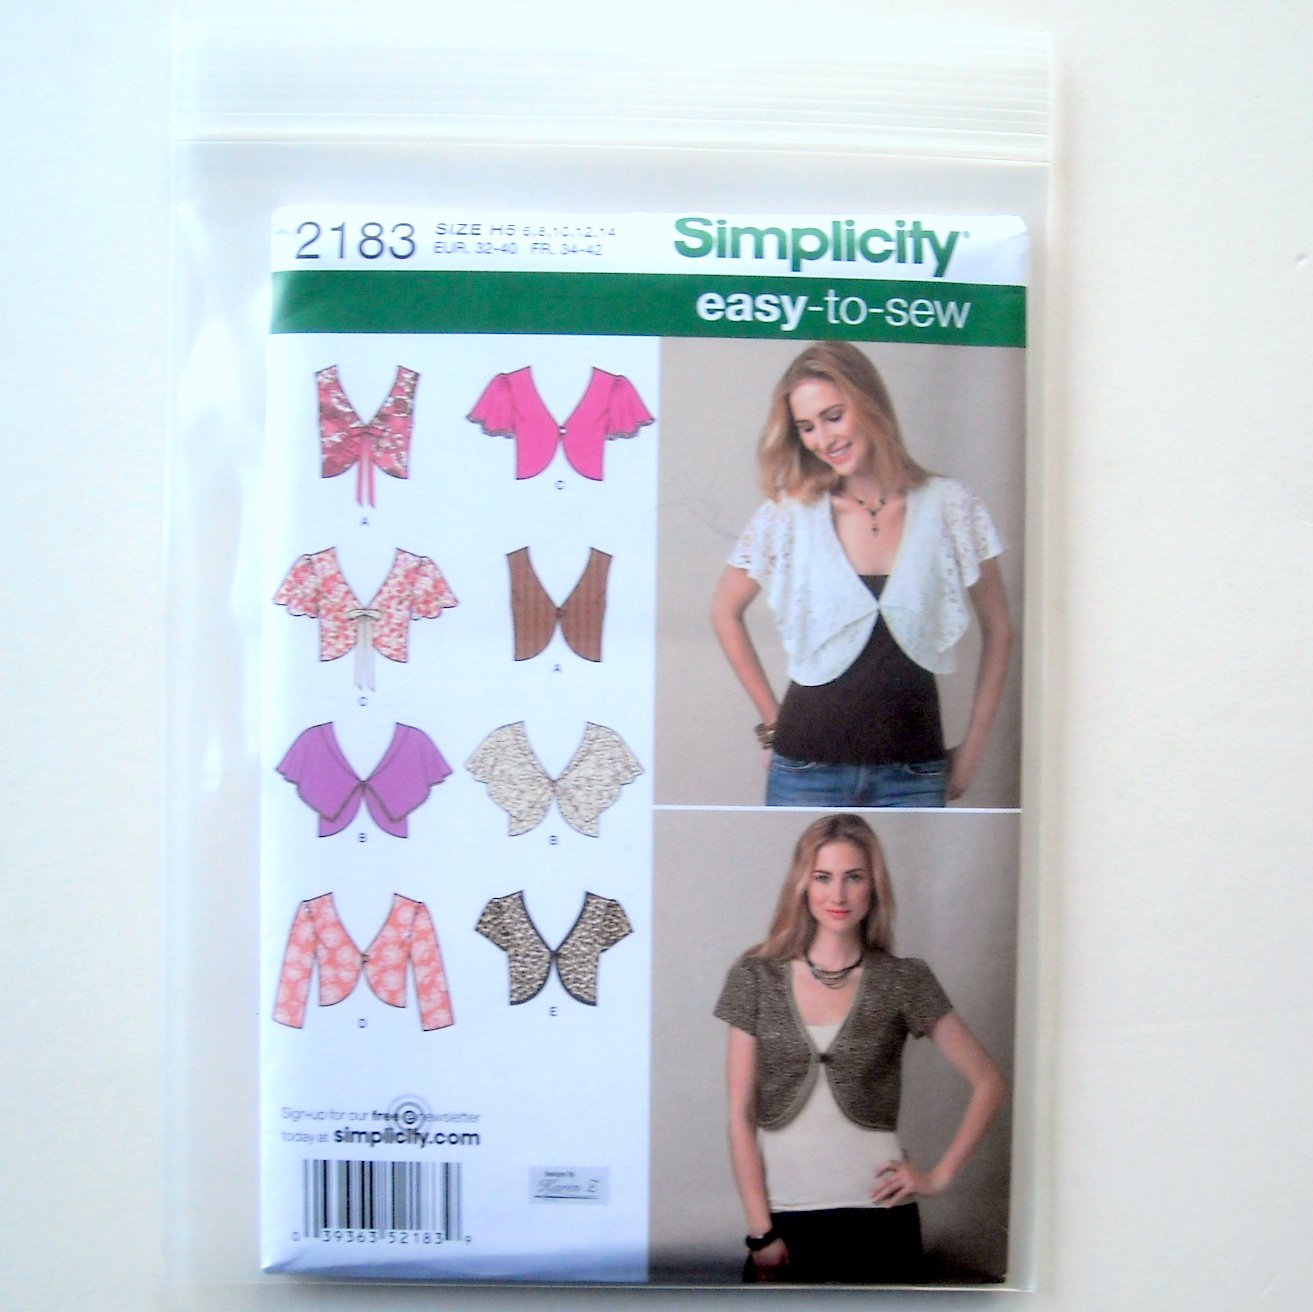 Simplicity Sewing Pattern 2185: Misses' Easy To Sew Skirts, Size H5  (6-8-10-12-14)